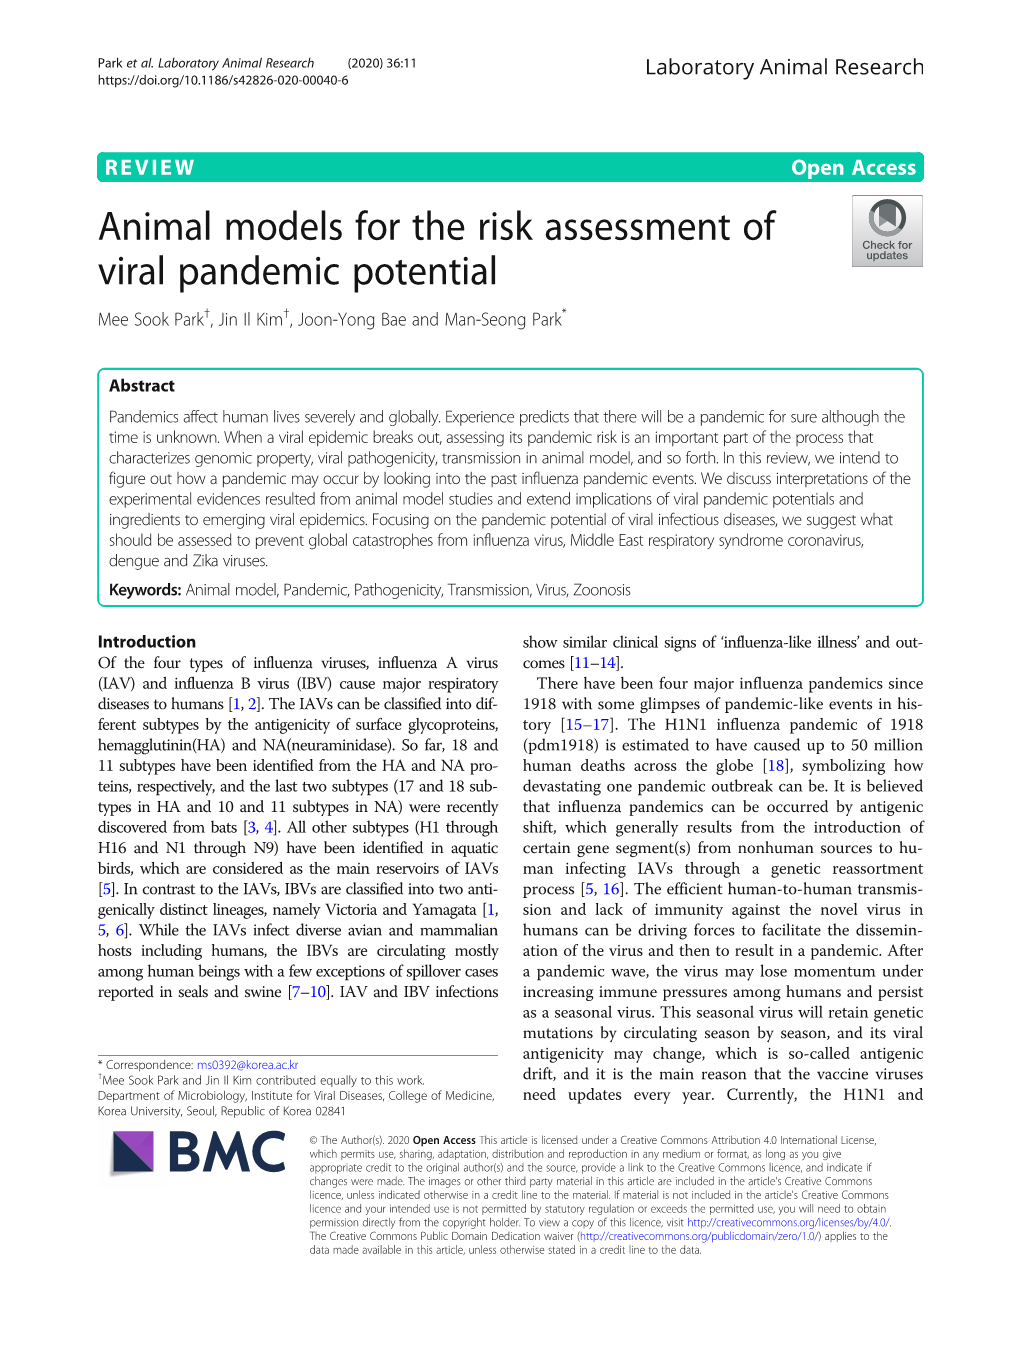 Animal Models for the Risk Assessment of Viral Pandemic Potential Mee Sook Park†, Jin Il Kim†, Joon-Yong Bae and Man-Seong Park*